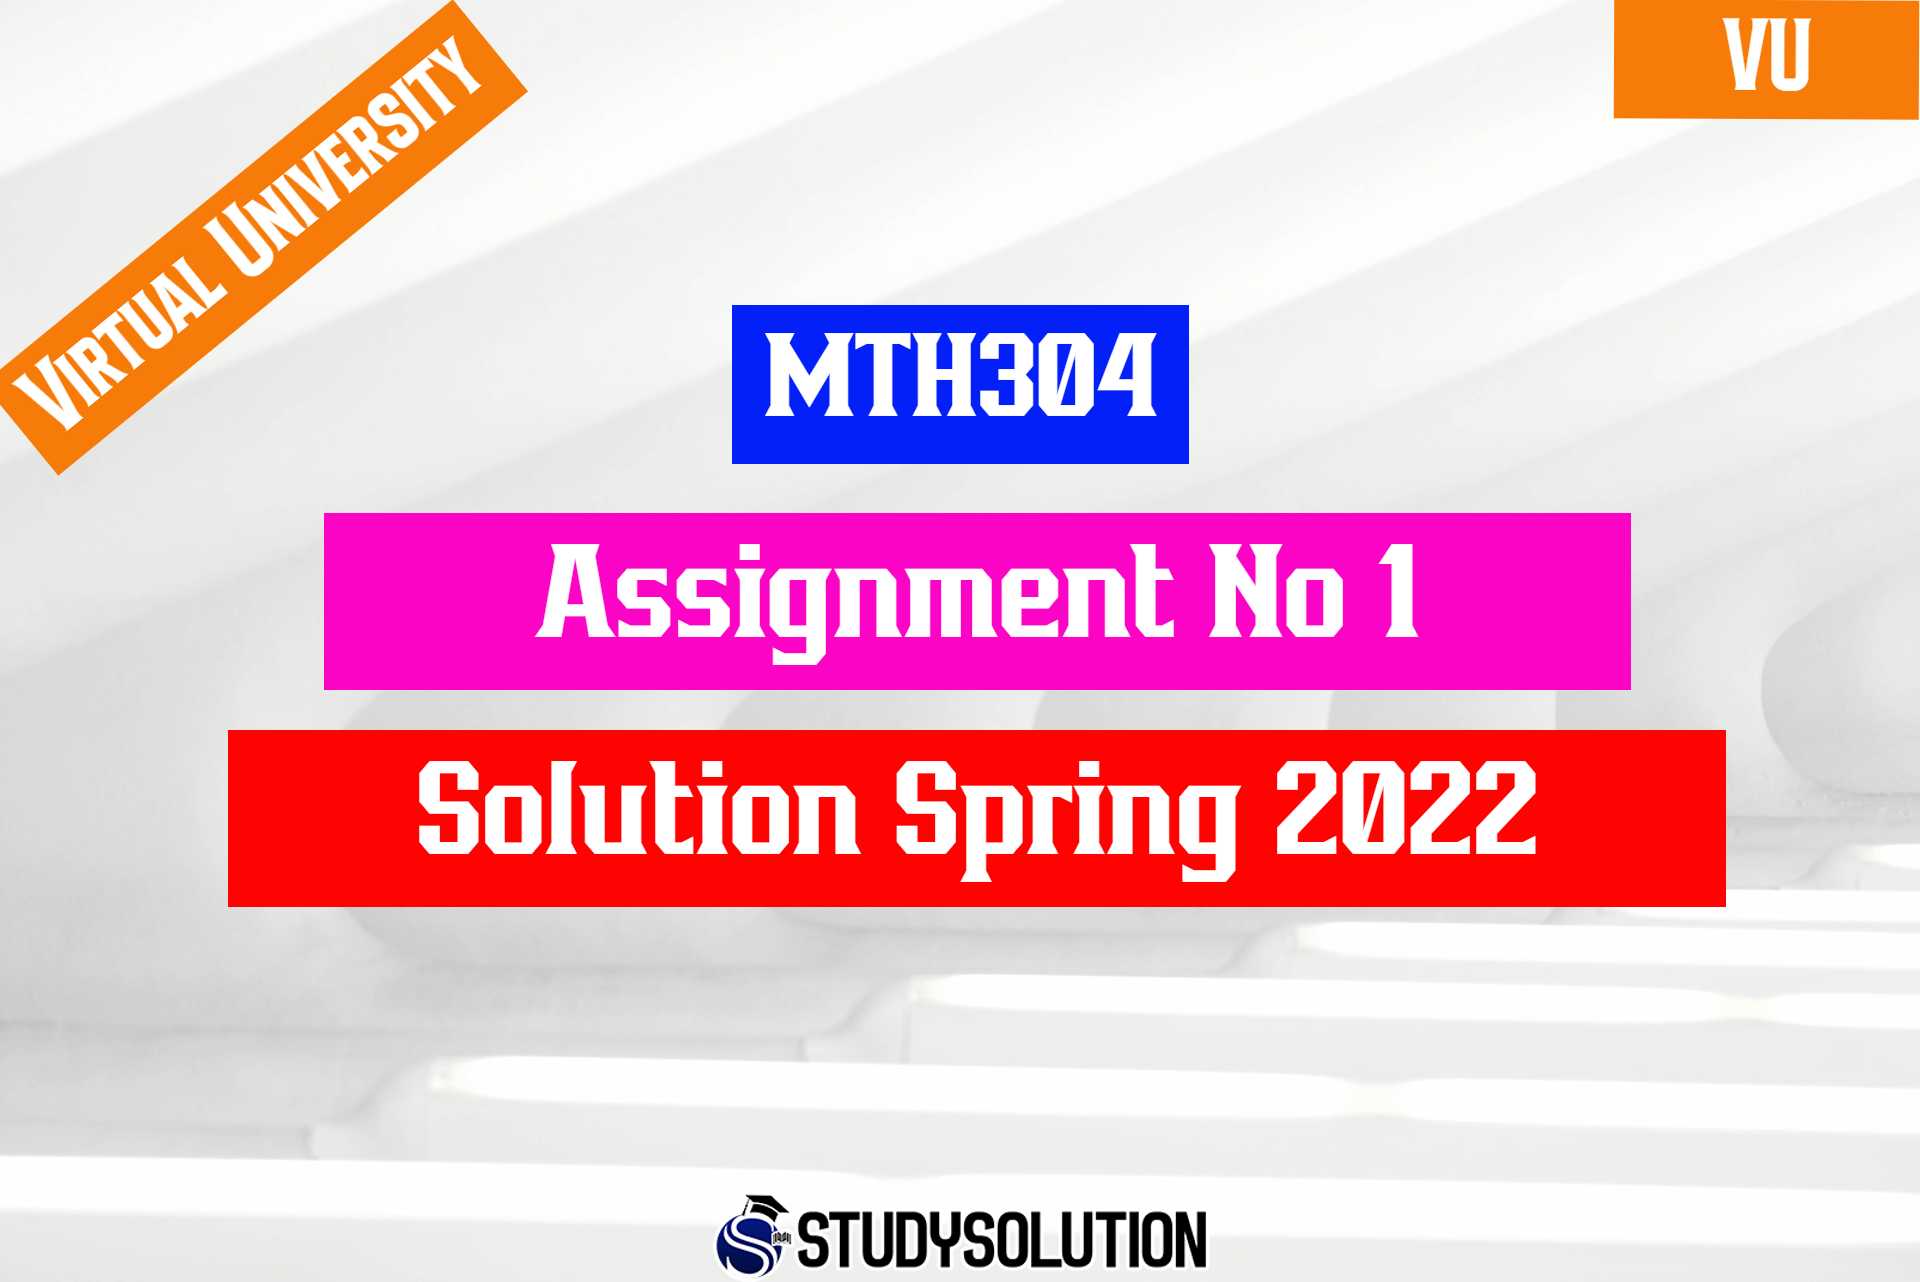 MTH304 Assignment No 1 Solution Spring 2022